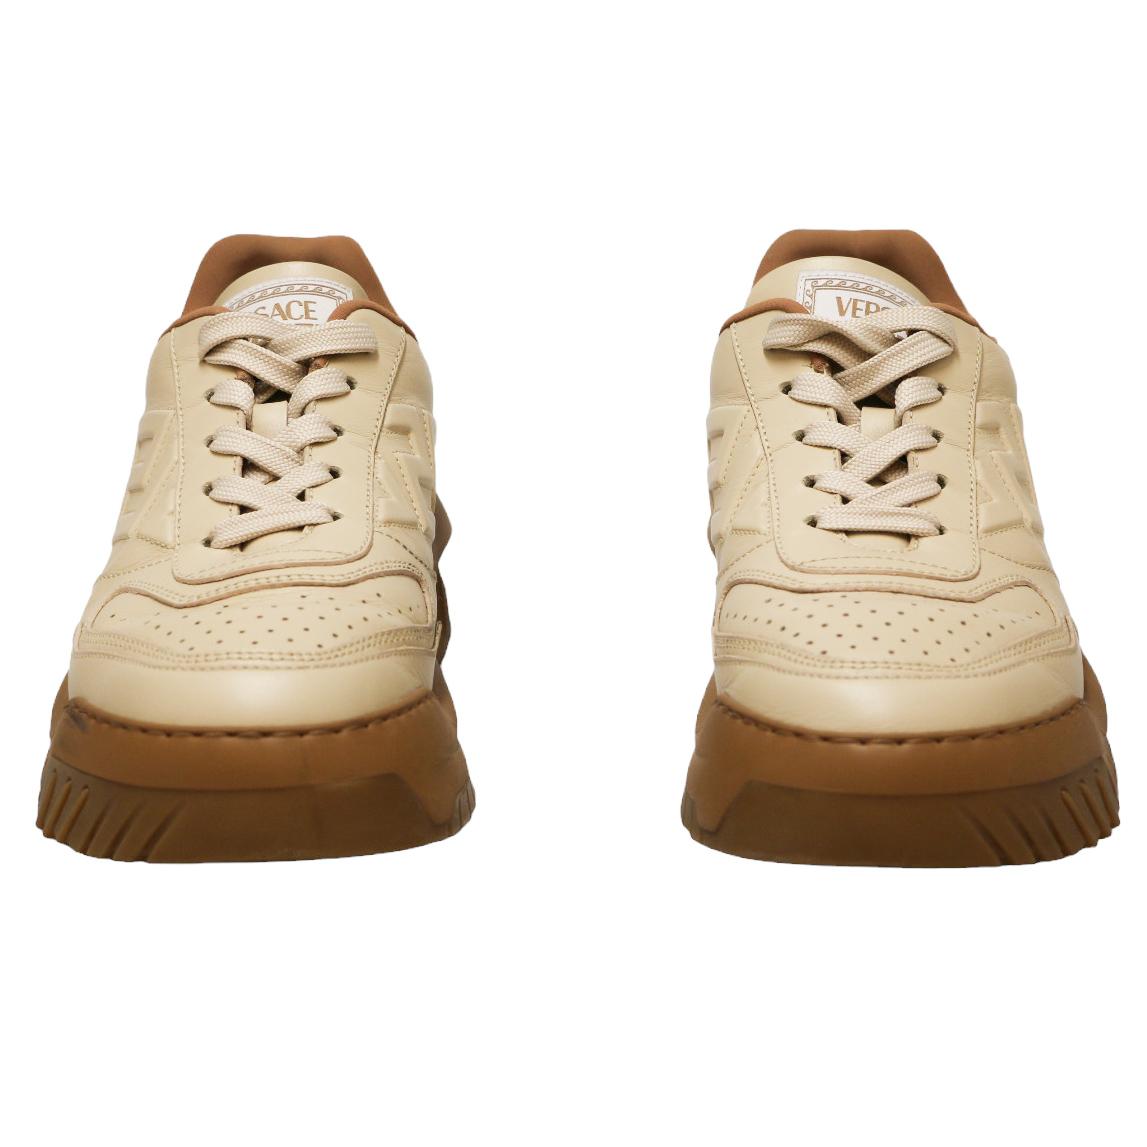 Amazing sneakers Odissea from Versace for men in size 40

Condition: excellent
Made in Italy
Model: Odissea
Genre: men
Material: leather
Color: beige
Size: 40
Details: Versace logo tone on tone on the side of the shoes, contrasting brown sole.